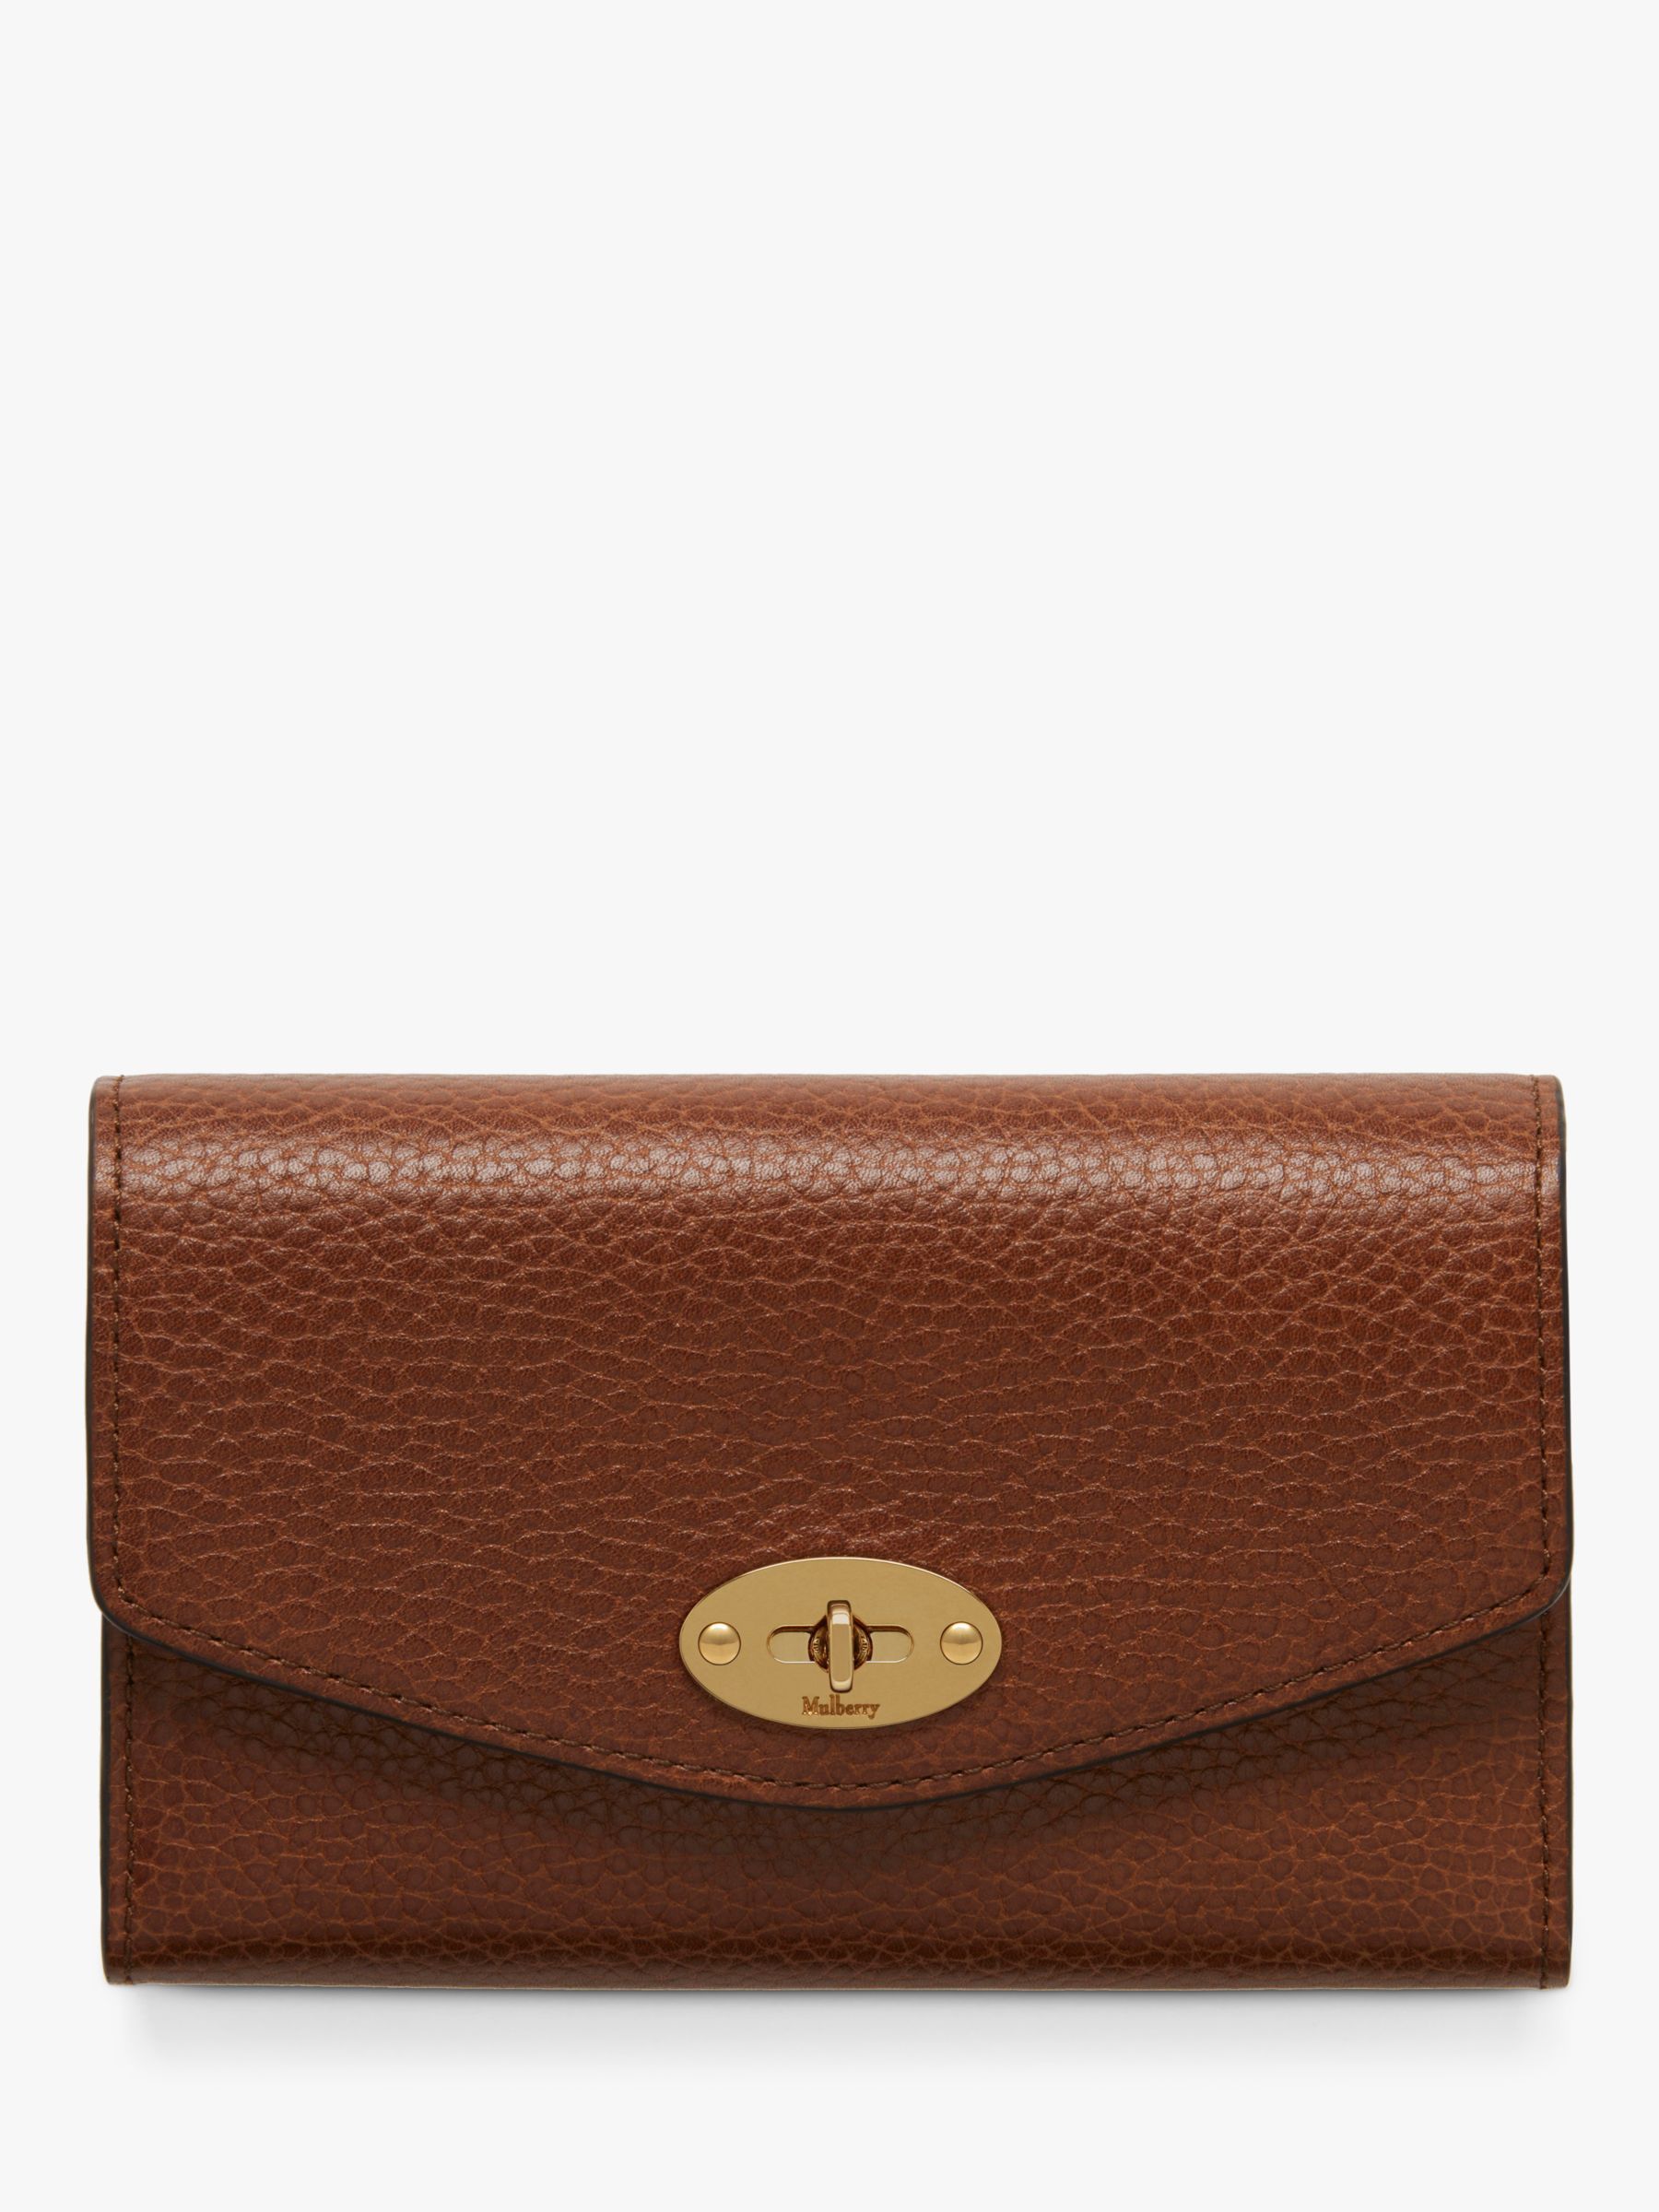 Buy Mulberry Darley Classic Grain Leather Medium Wallet Online at johnlewis.com